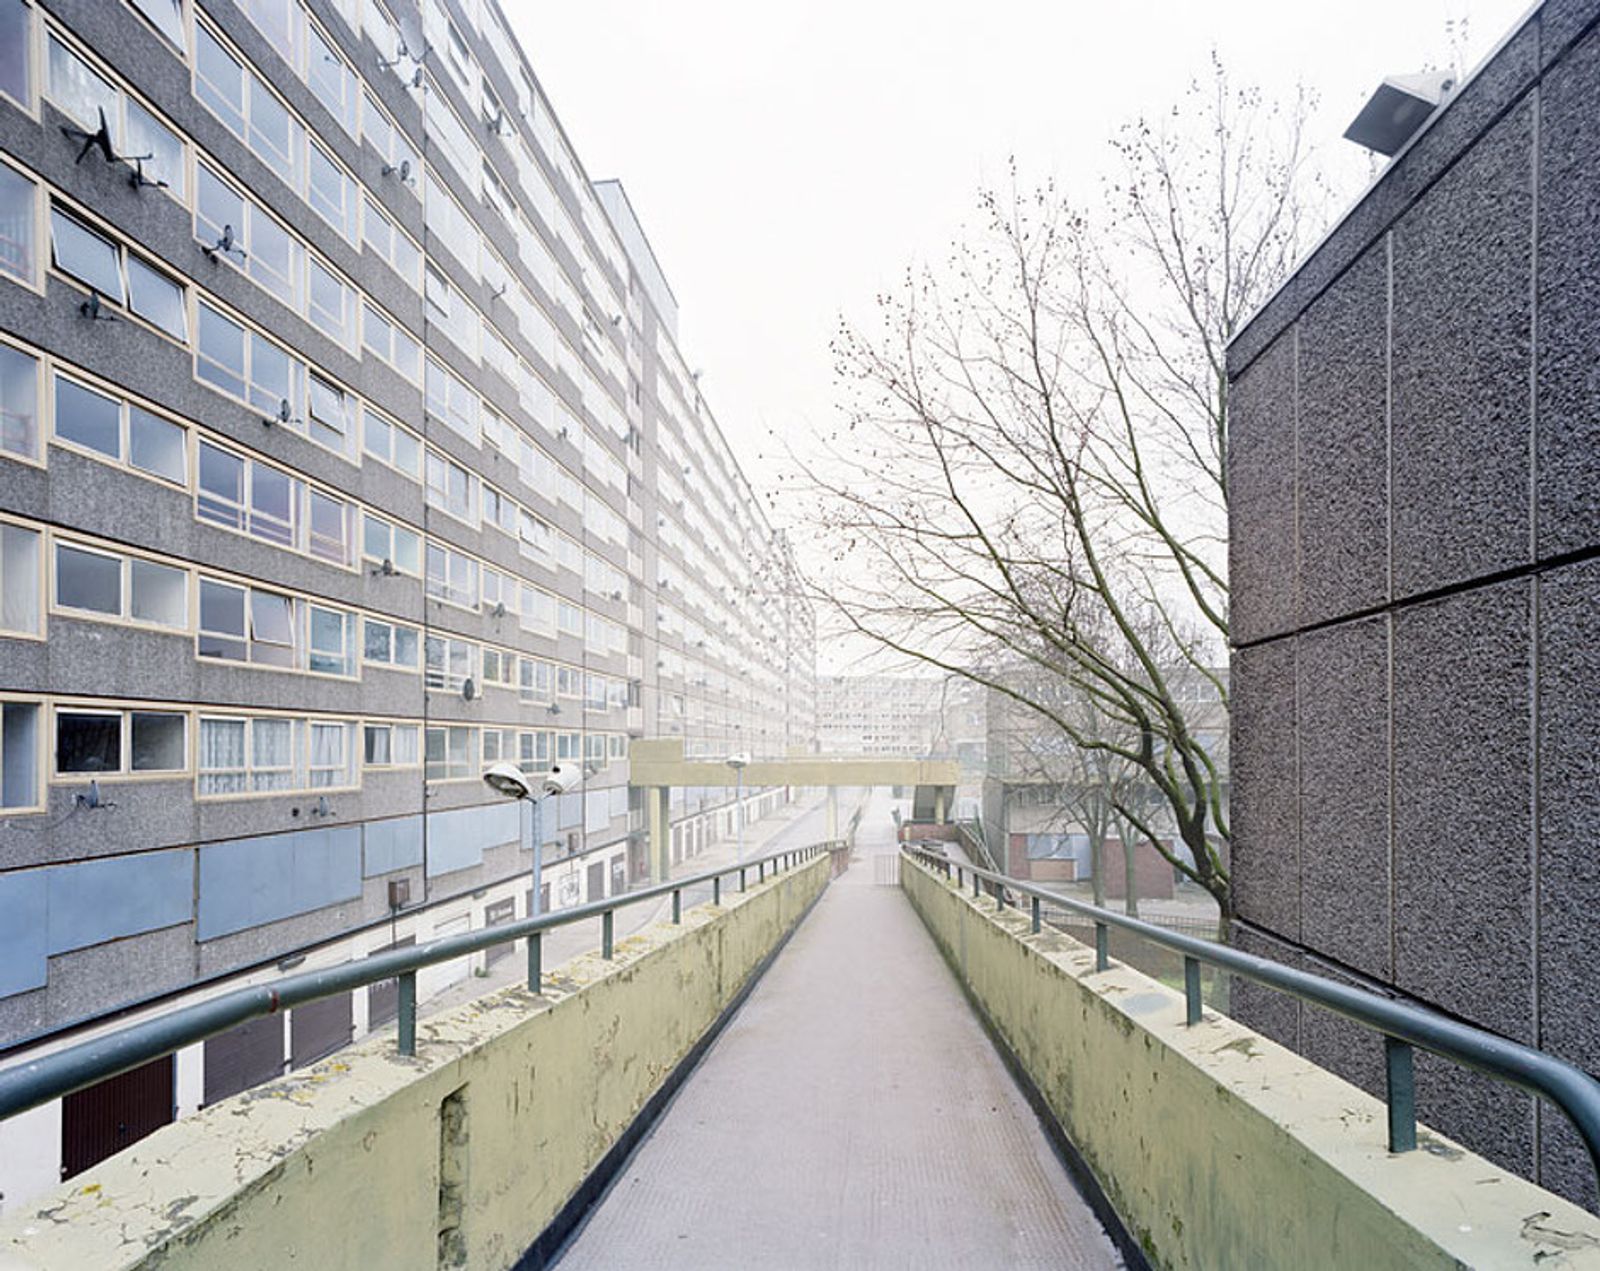 © Simon Kennedy - Image from the Heygate Abstracted photography project